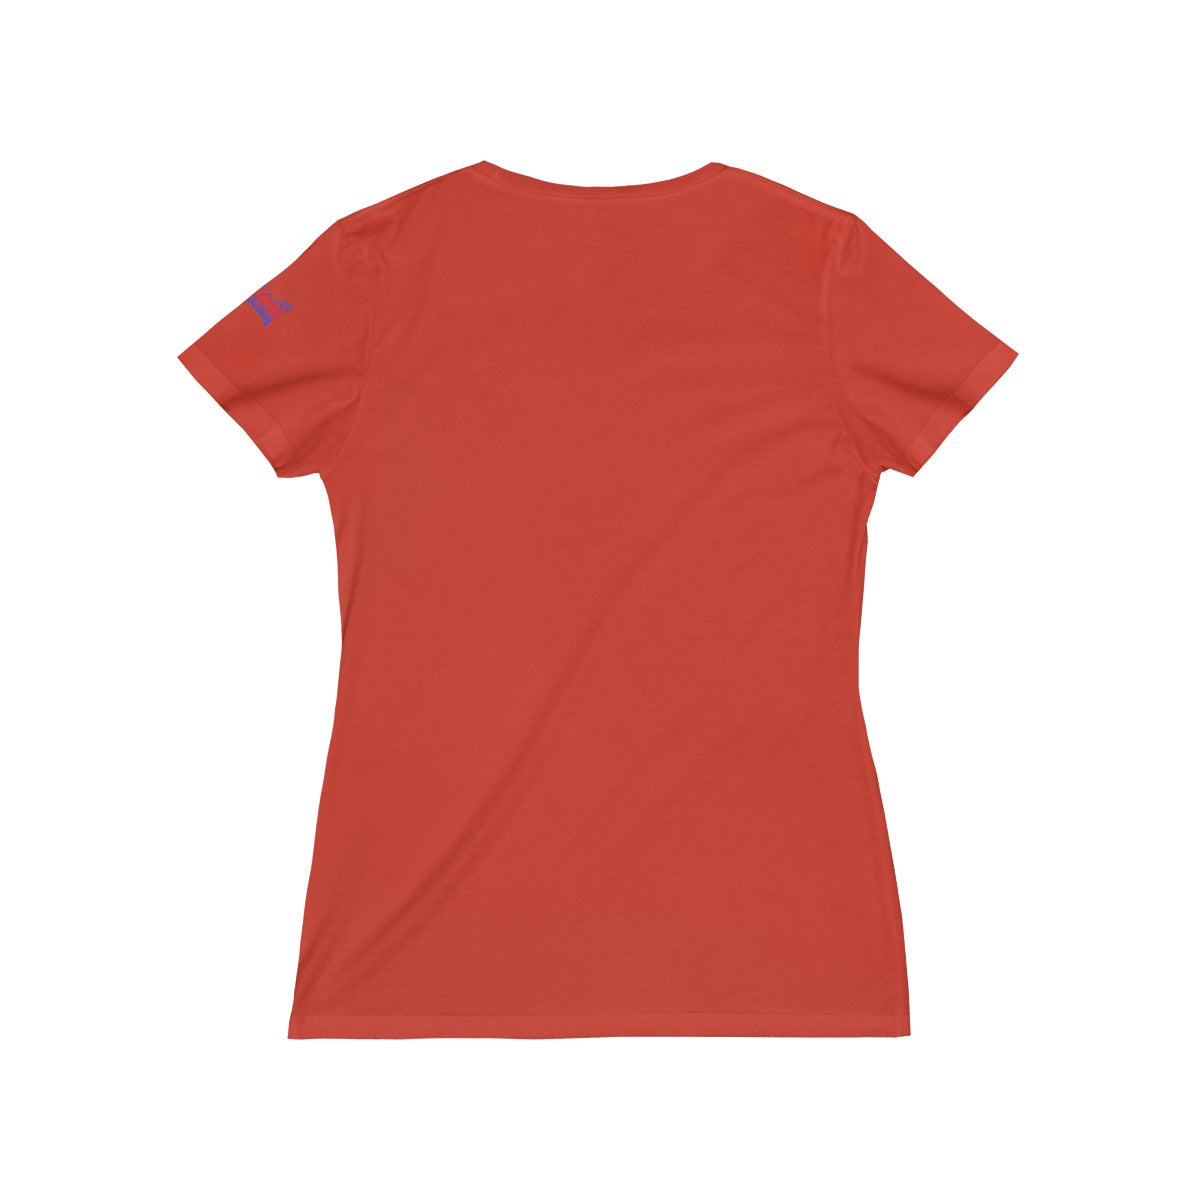 Fearless Red / Shorter Sleeve Tee